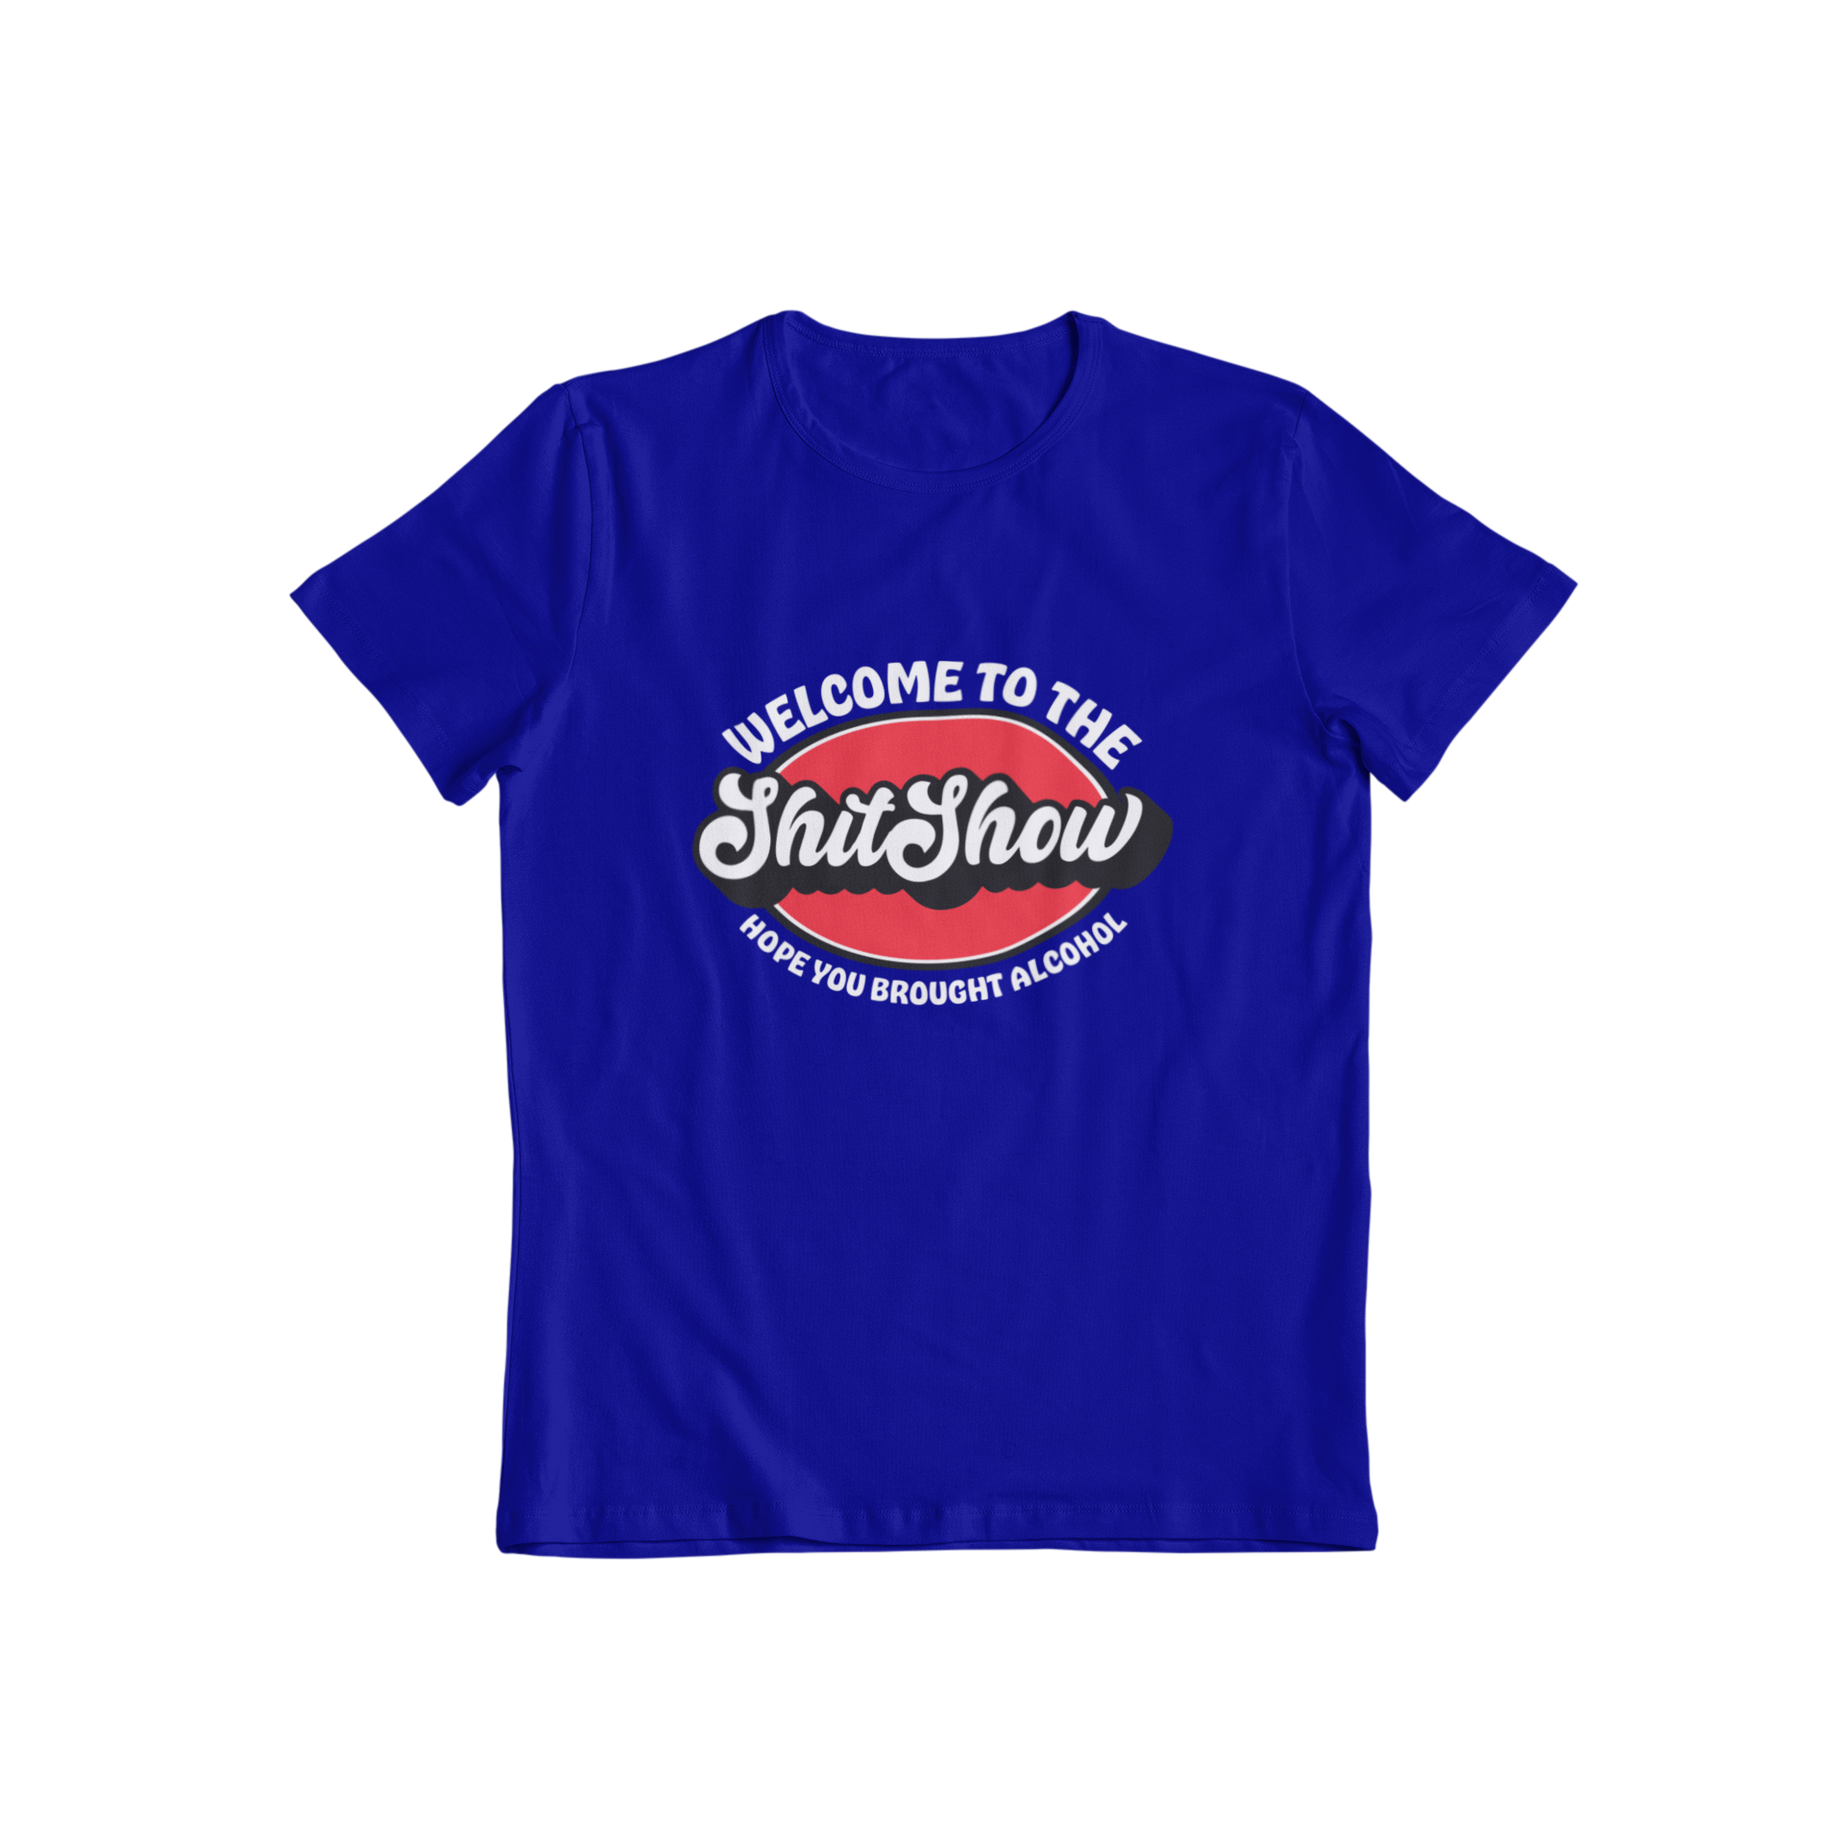 Step right up to The Shitshow T-shirt! This classic slogan tee proudly displays the phrase "welcome to the shitshow hope you brought alcohol". Perfect for anyone who likes to keep their humor light and their spirits high. (Note: Shirt does not come with alcohol)